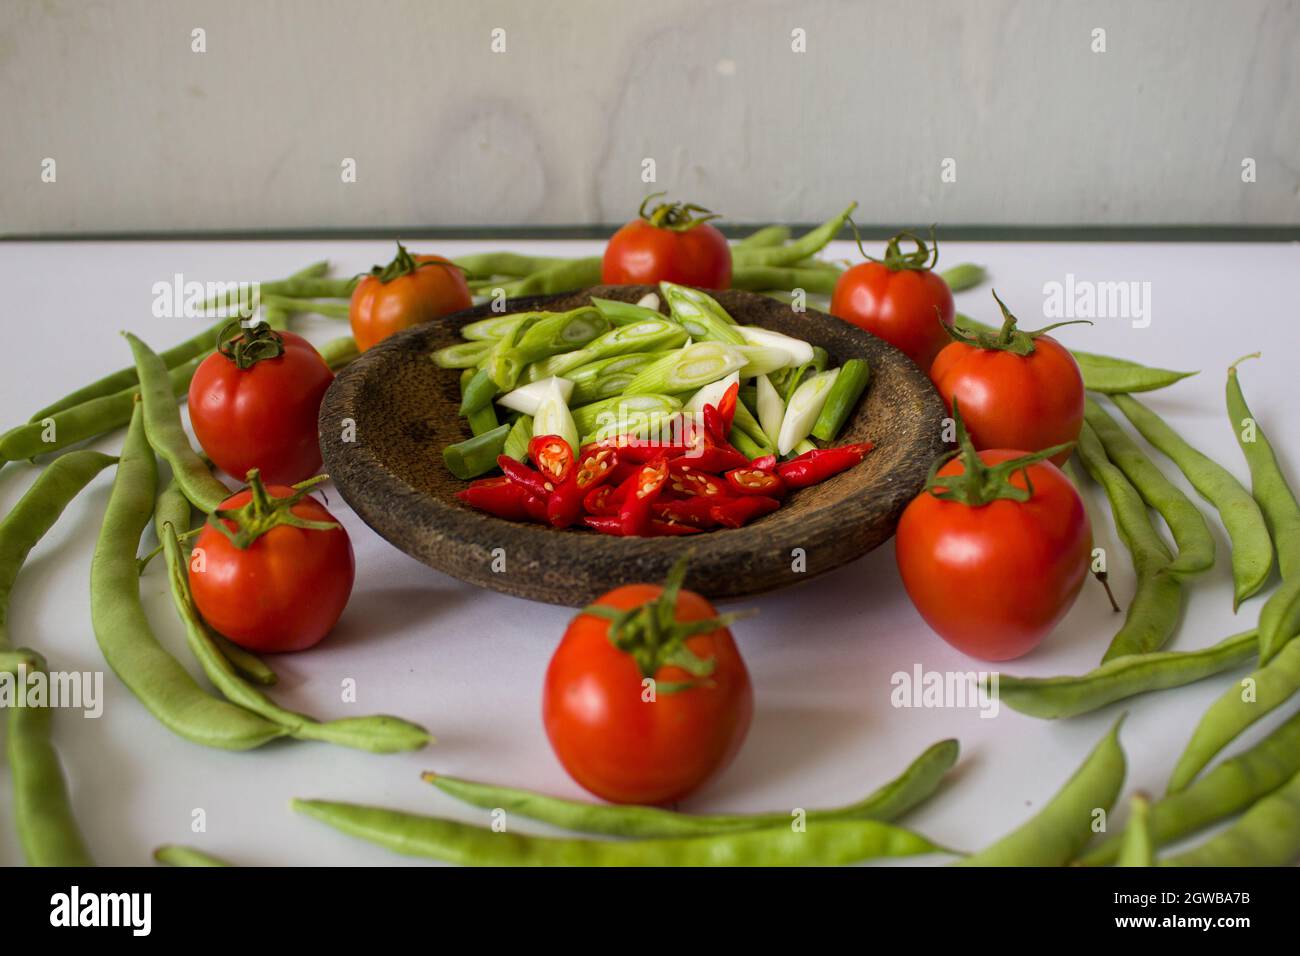 Close-up Of Tomatoes In Plate On Table Stock Photo